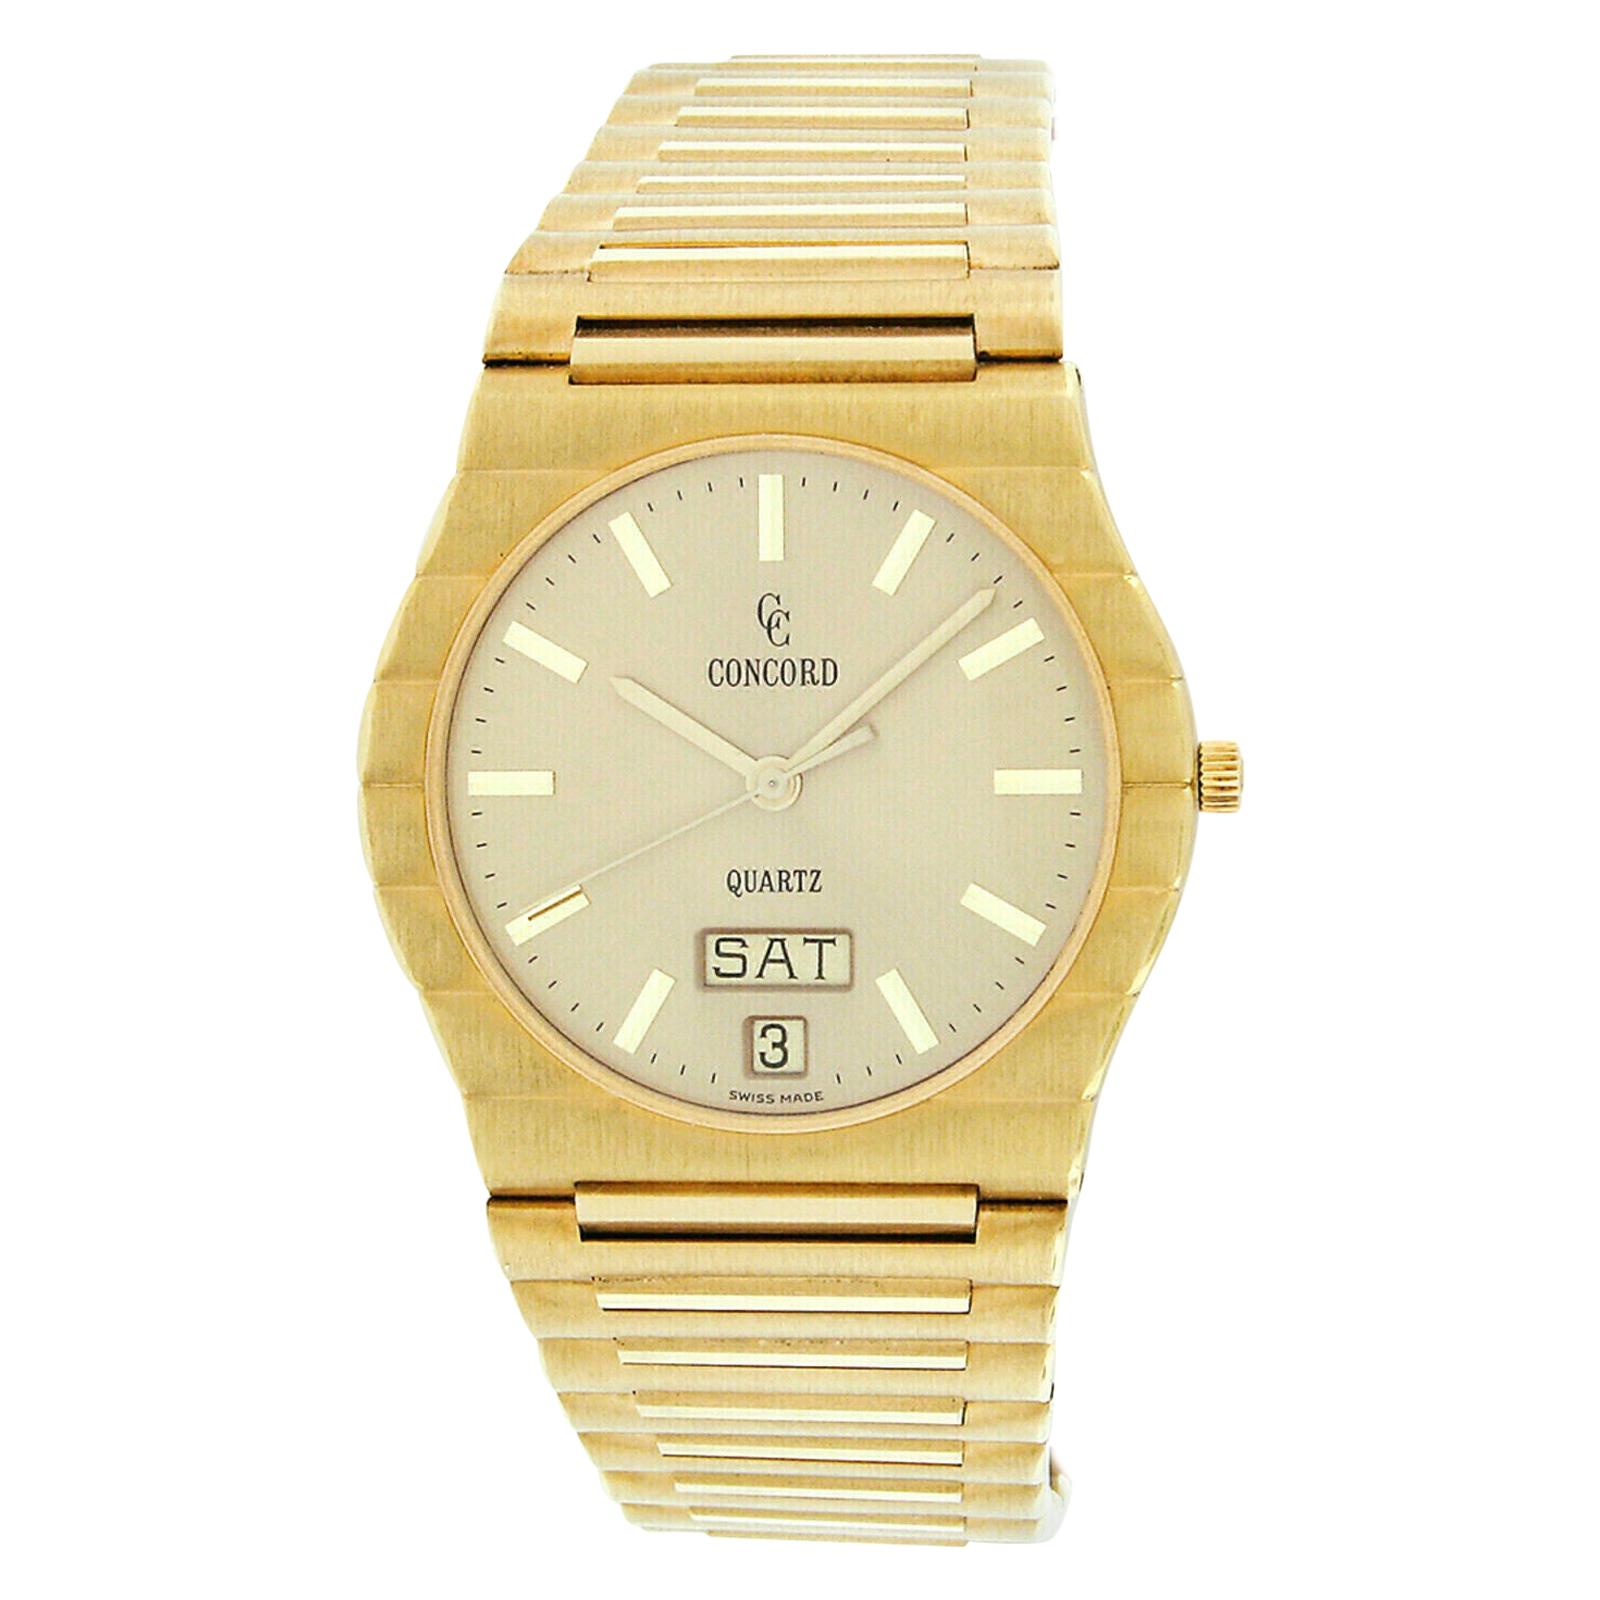 Concord 18k Yellow Gold Day Date Quartz Wrist Watch 50.58.218 Box & Papers